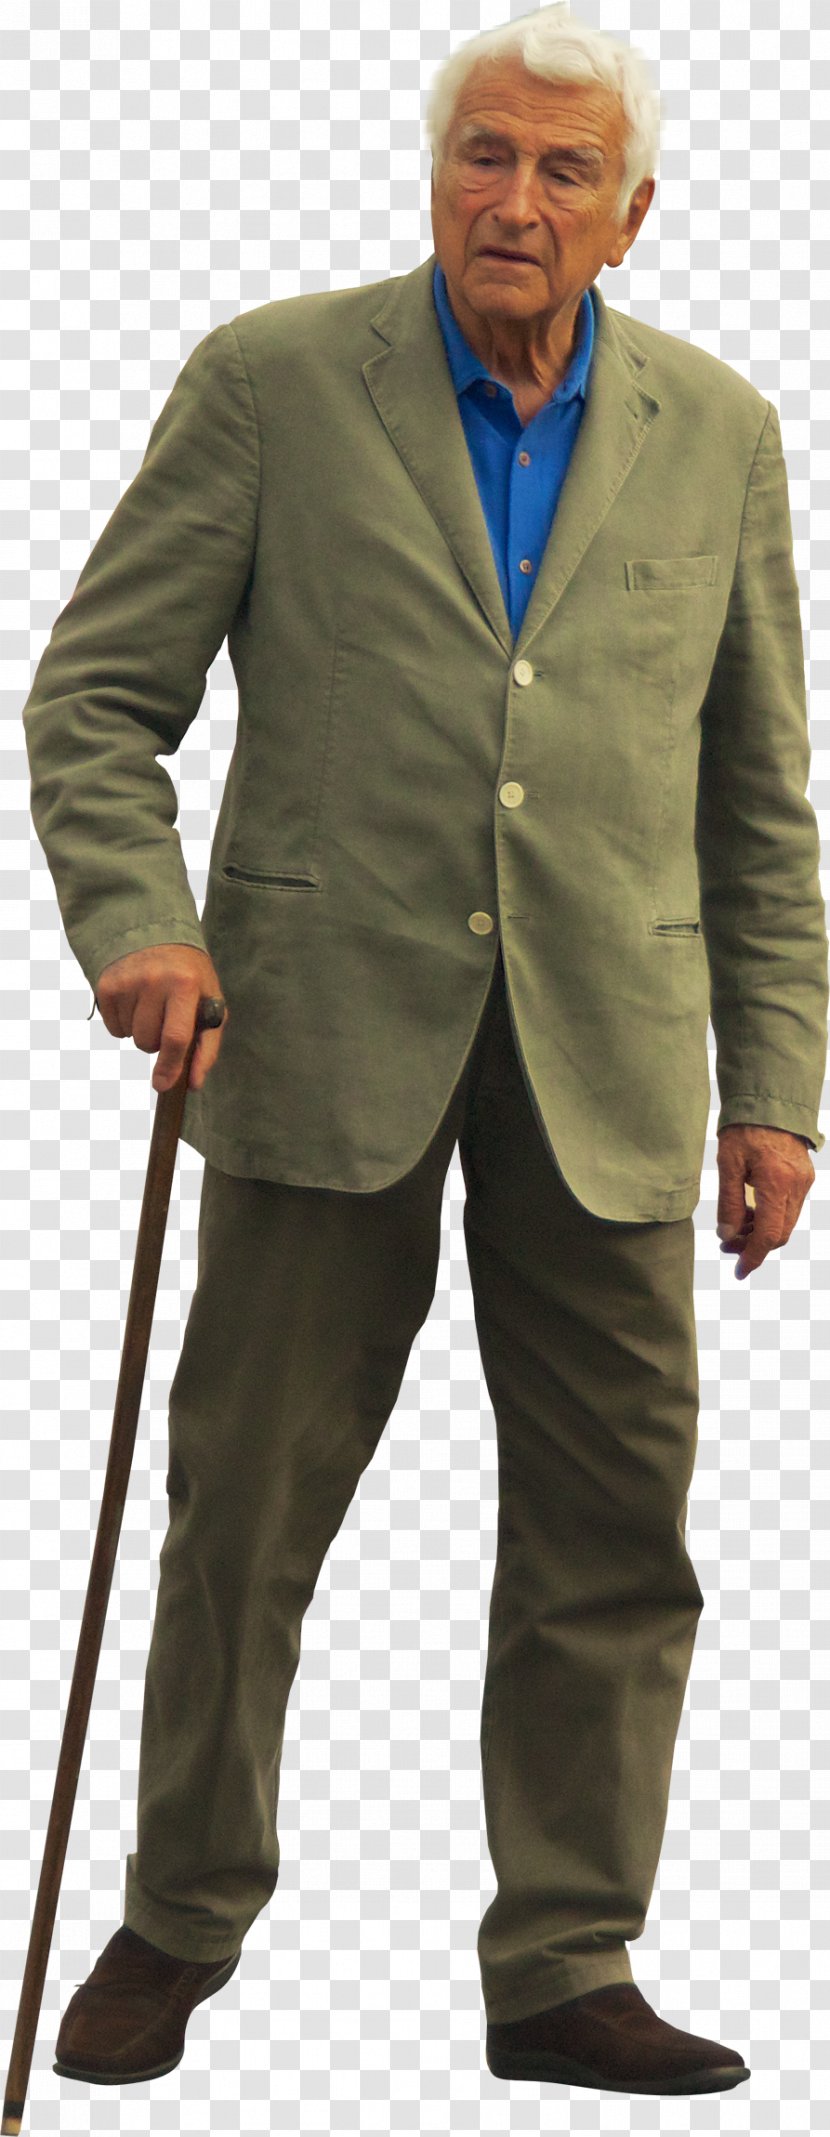 PhotoScape - Standing - OLD MAN Transparent PNG